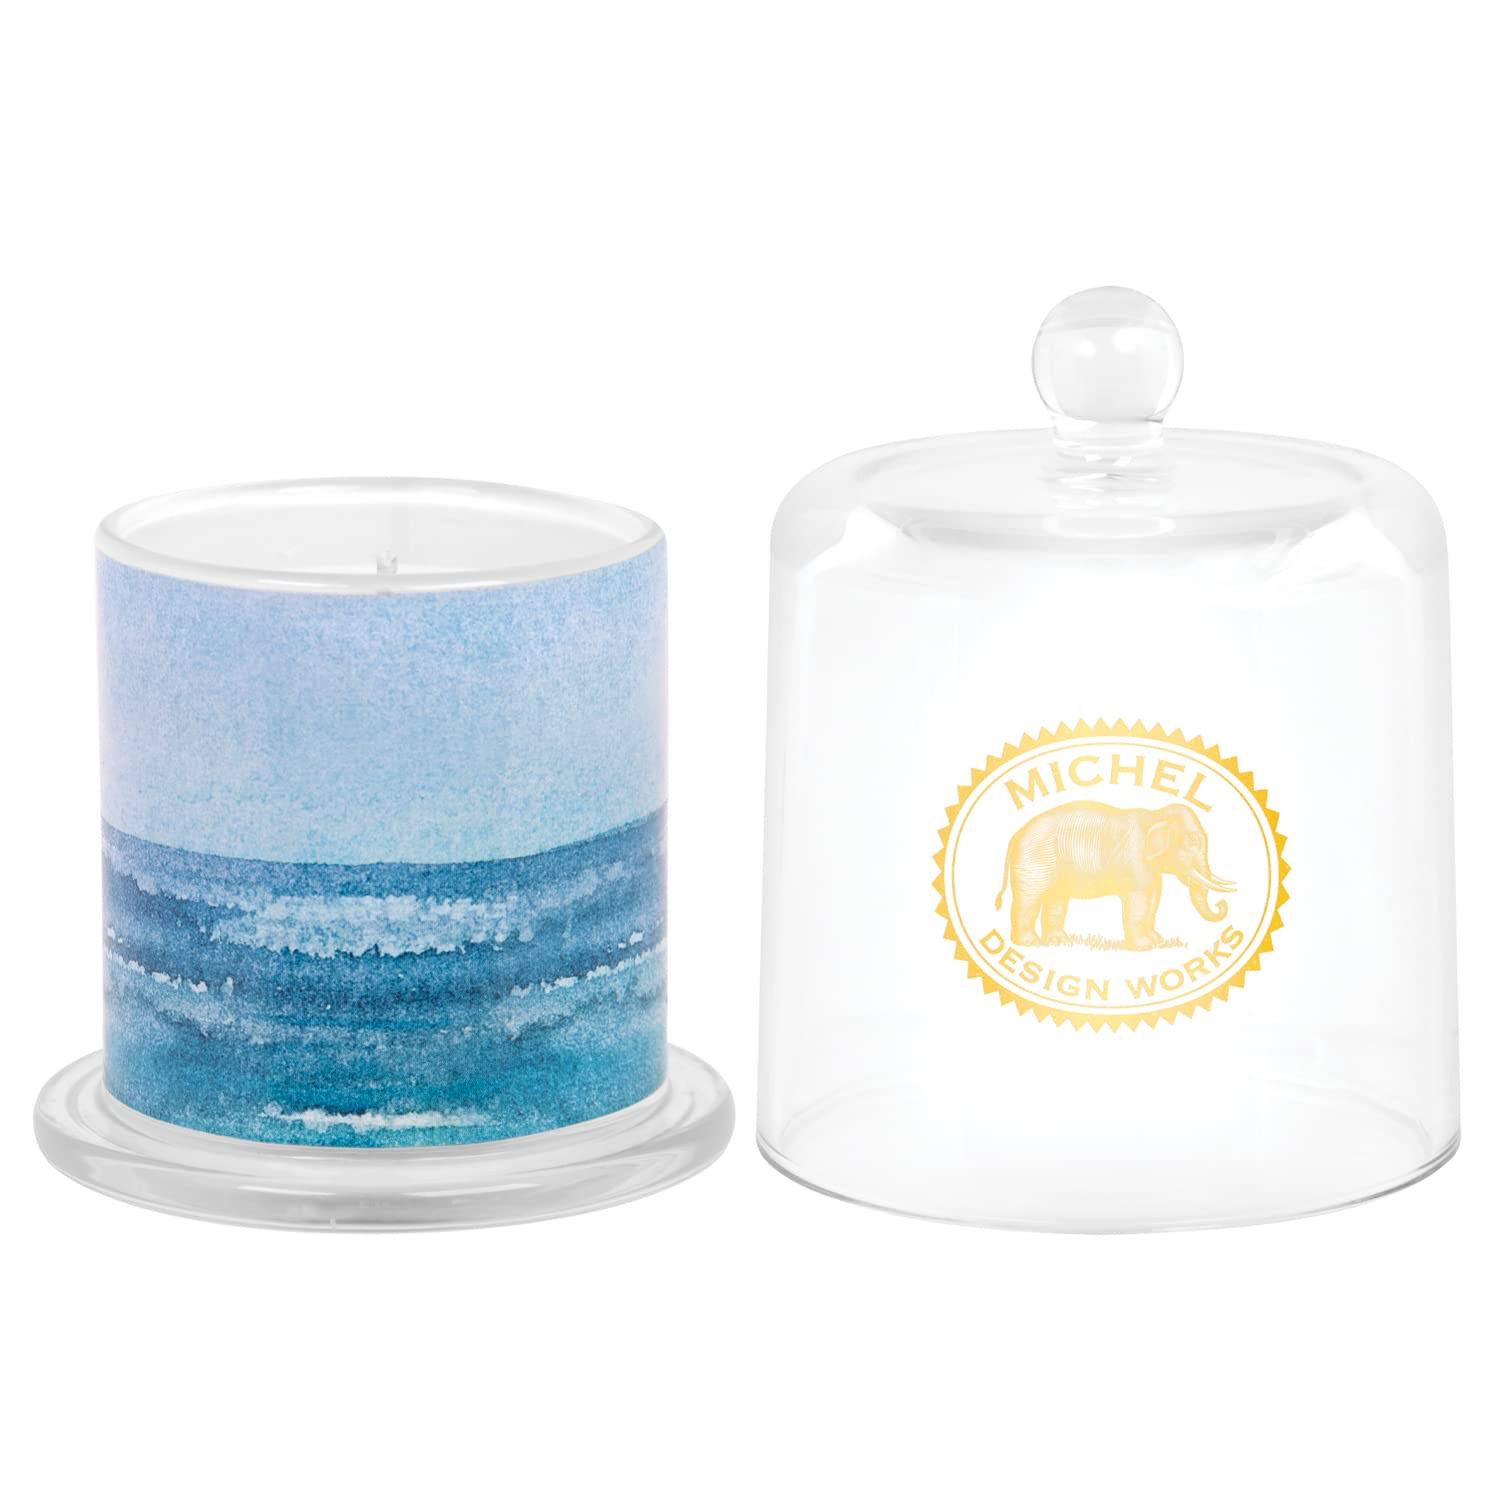 Michel Design Works Cloche Candle, Deep Water Scented